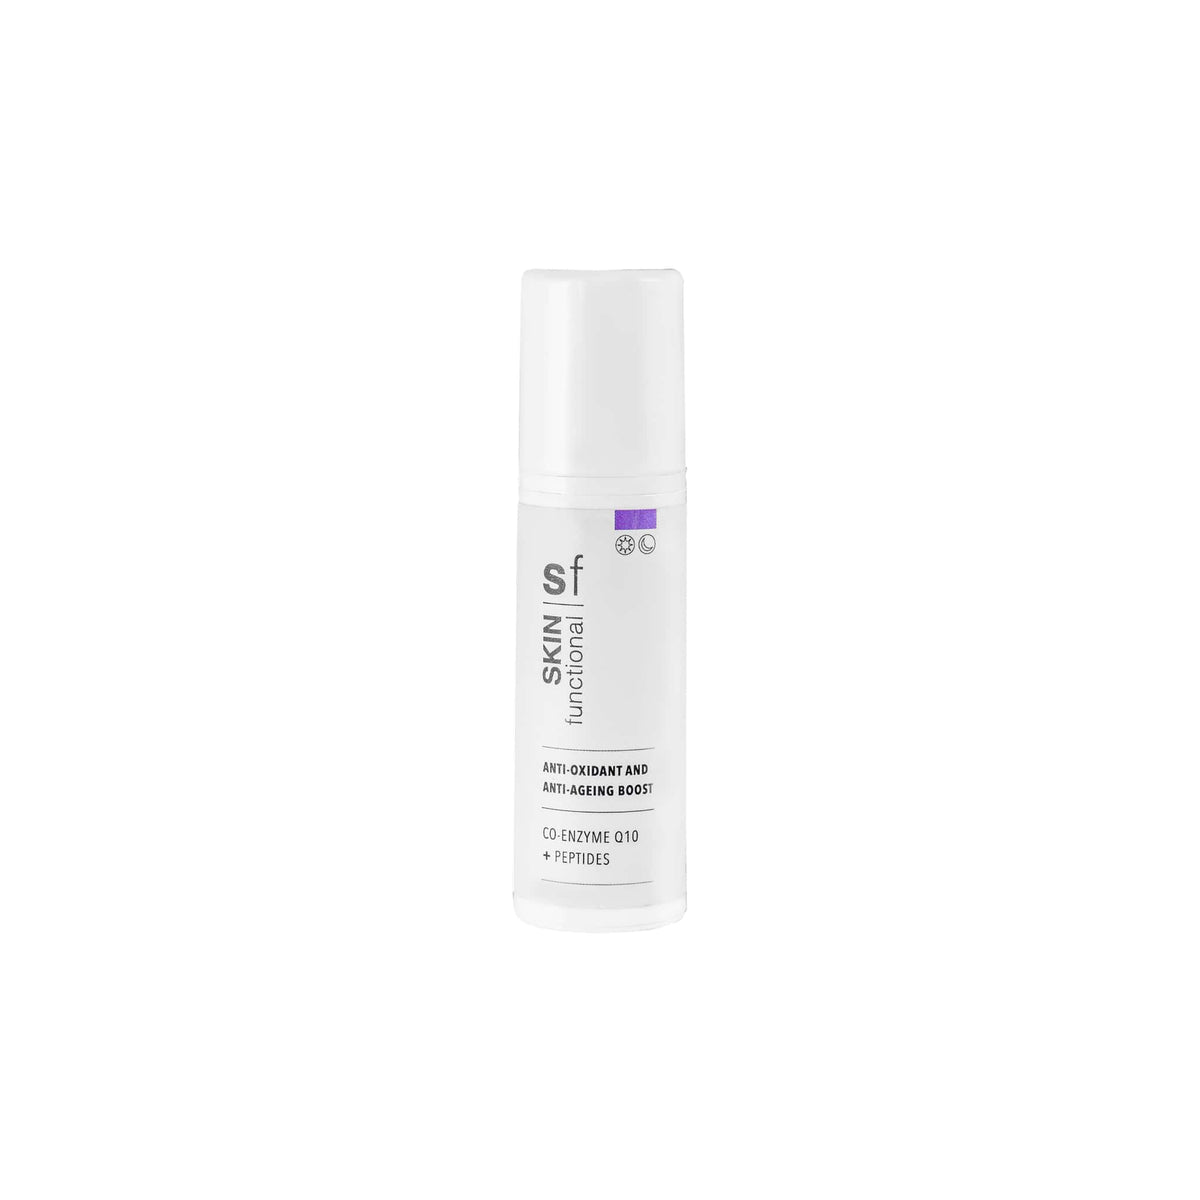 Skin Functional Anti-oxidant and Anti-ageing Boost 30ml